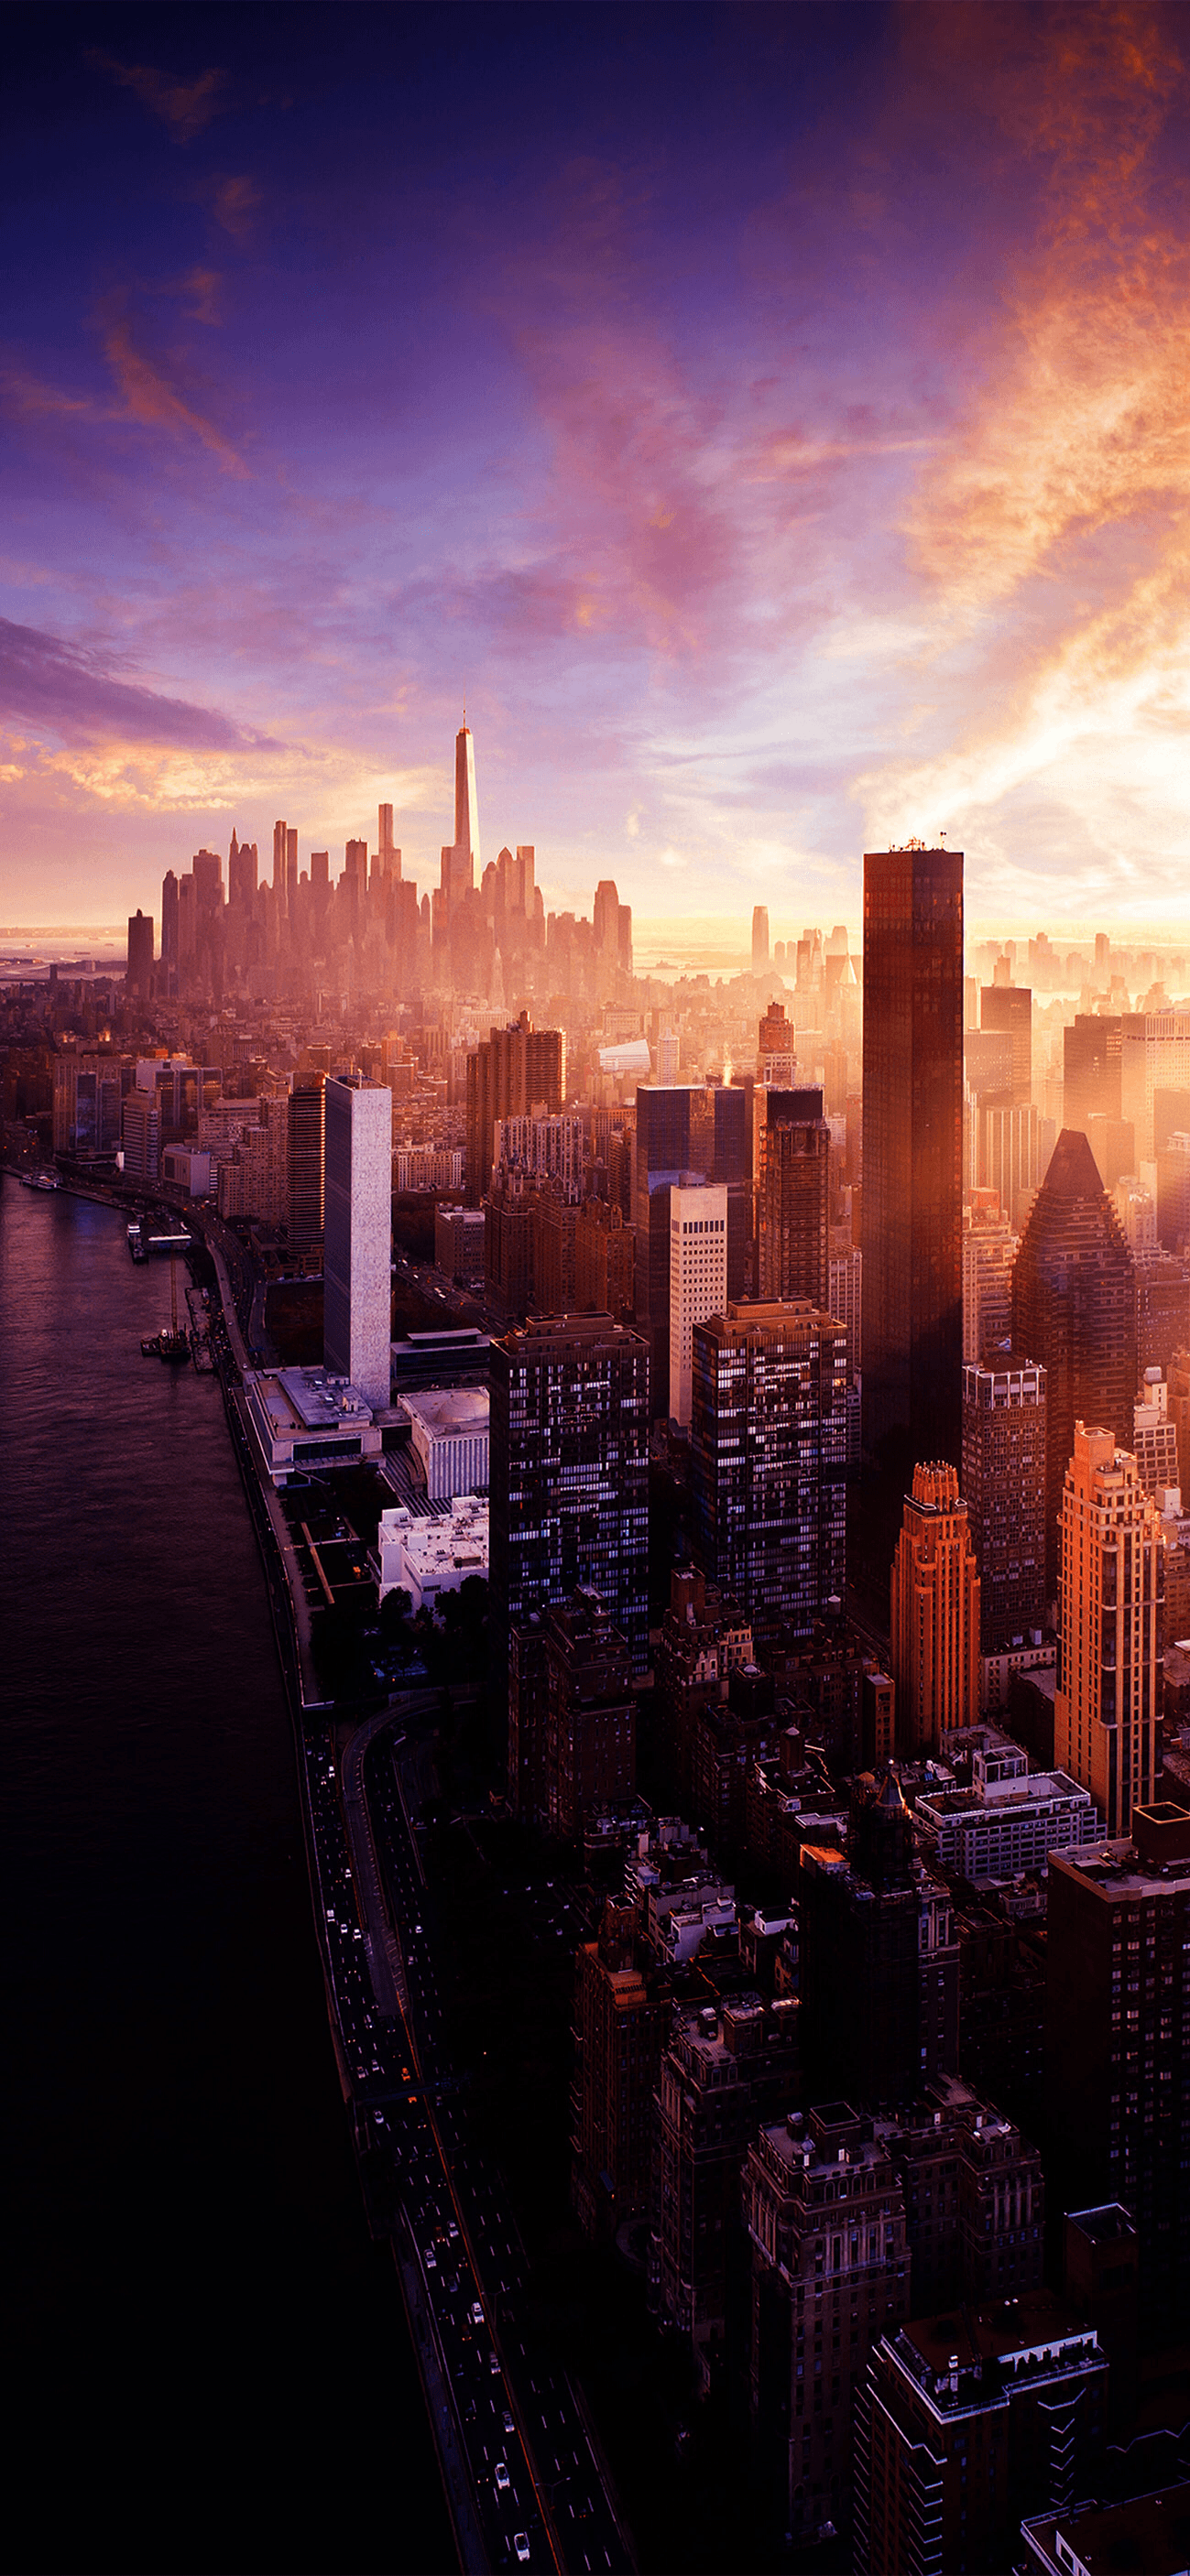 Nyc sunset iPhone wallpaper. City wallpaper, New york city, Beautiful places